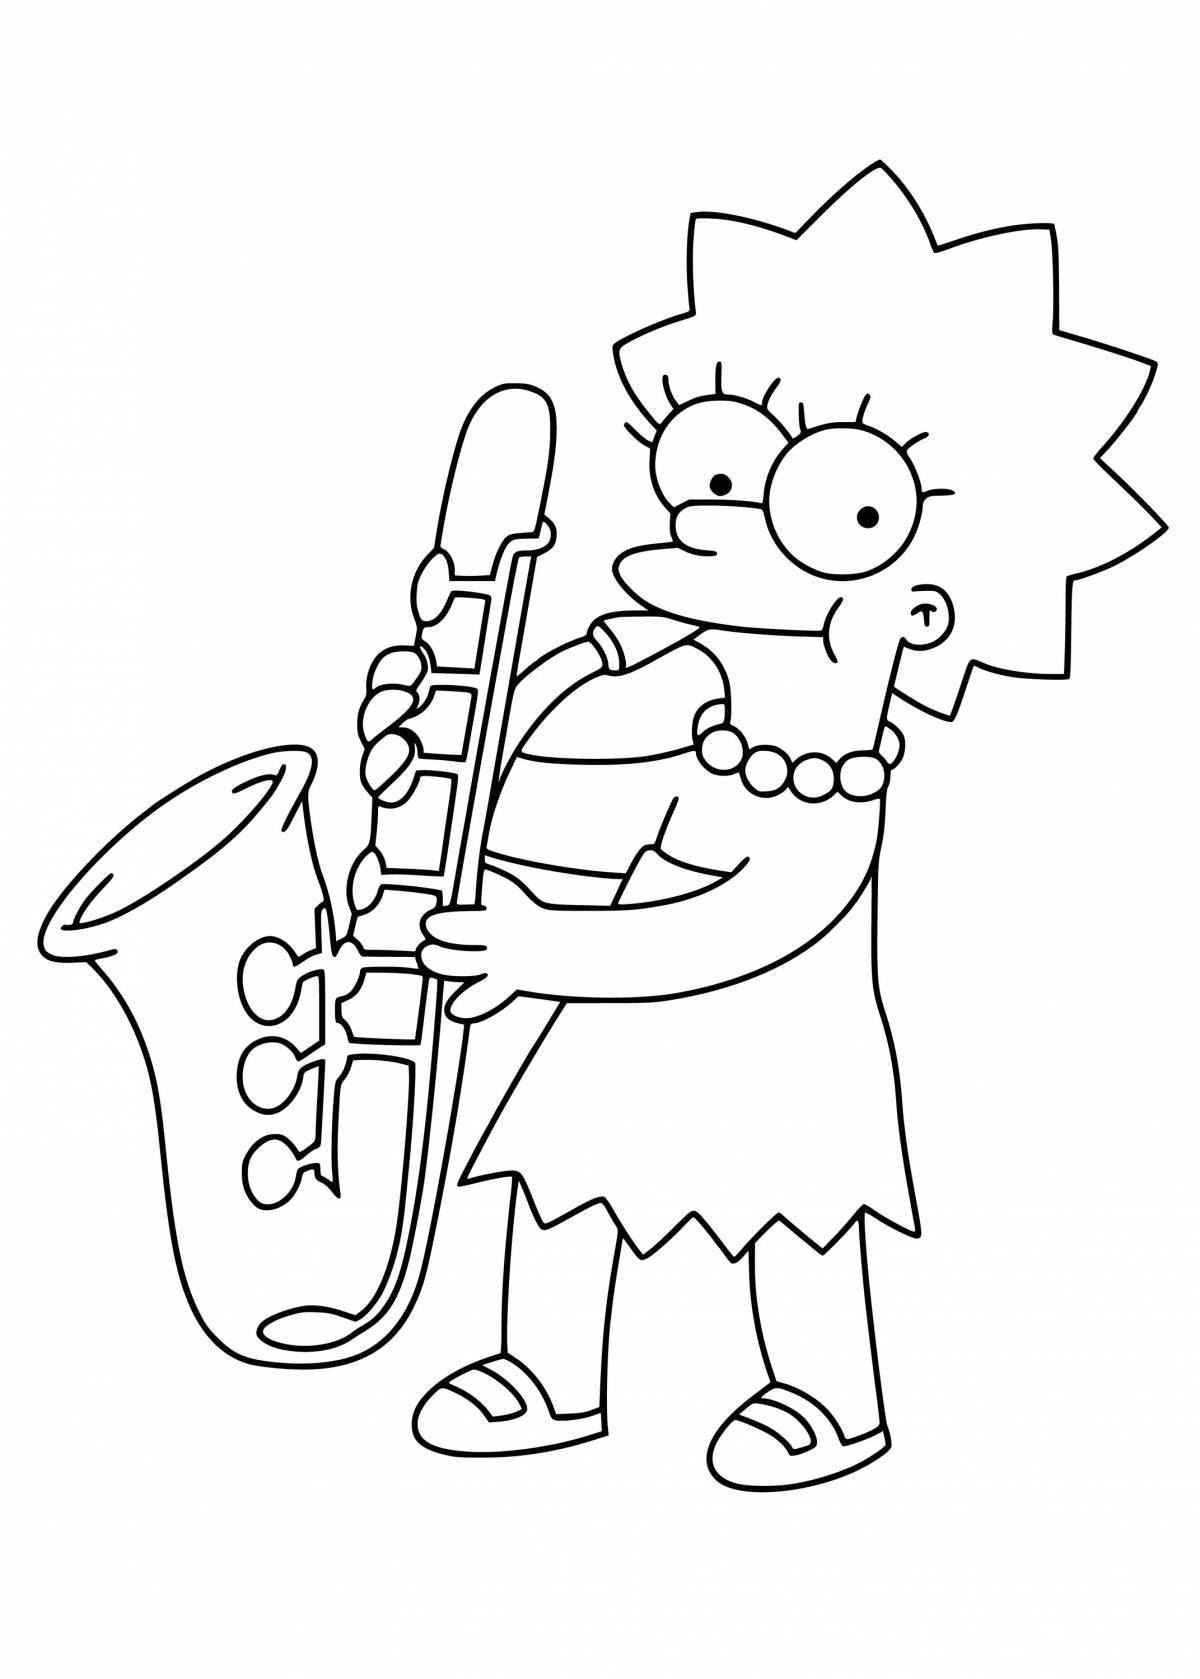 Color-lush lisa simpson coloring page